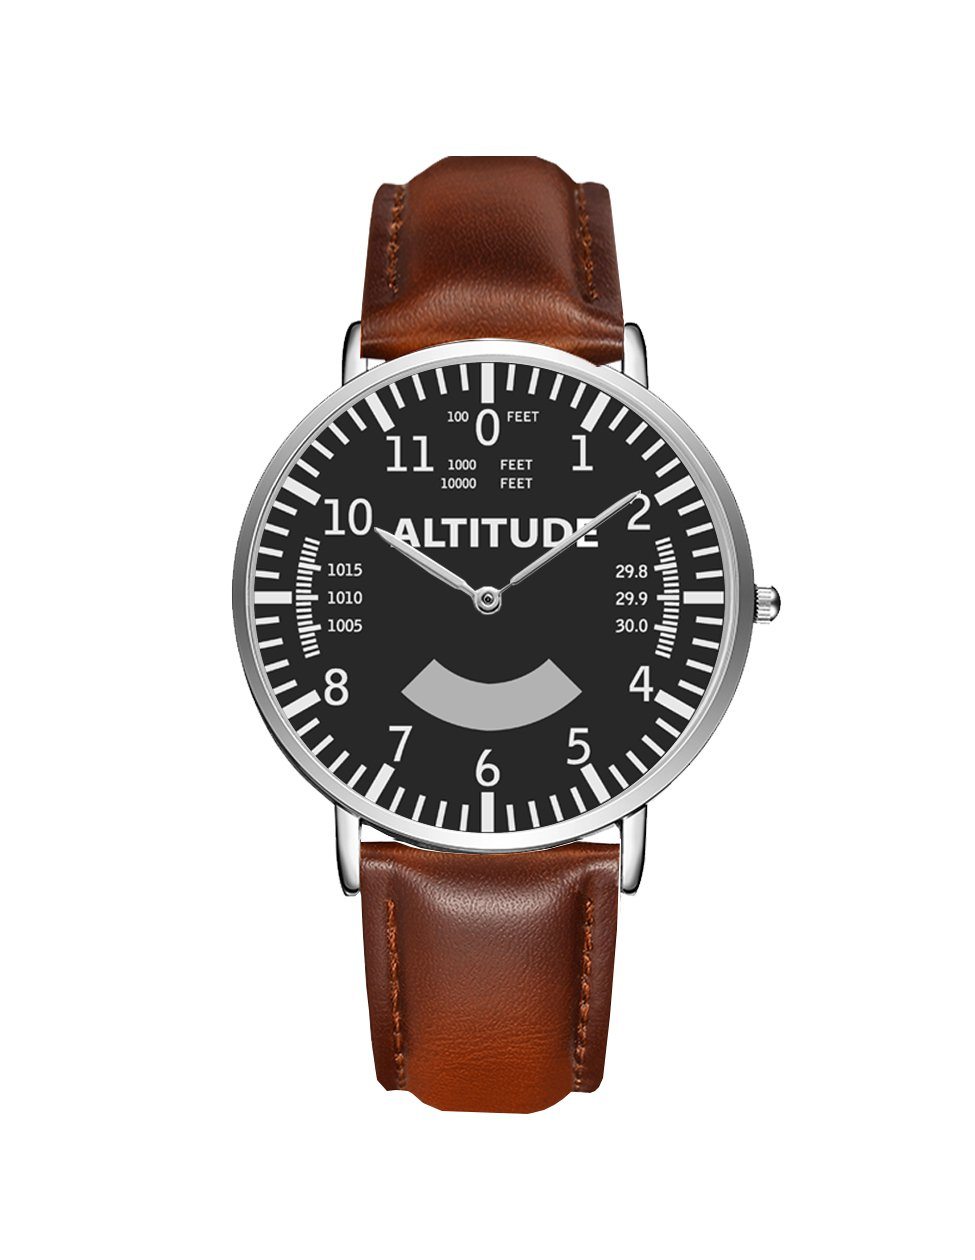 Airplane Instrument Series (Altitude) Leather Strap Watches Pilot Eyes Store Silver & Brown Leather Strap 